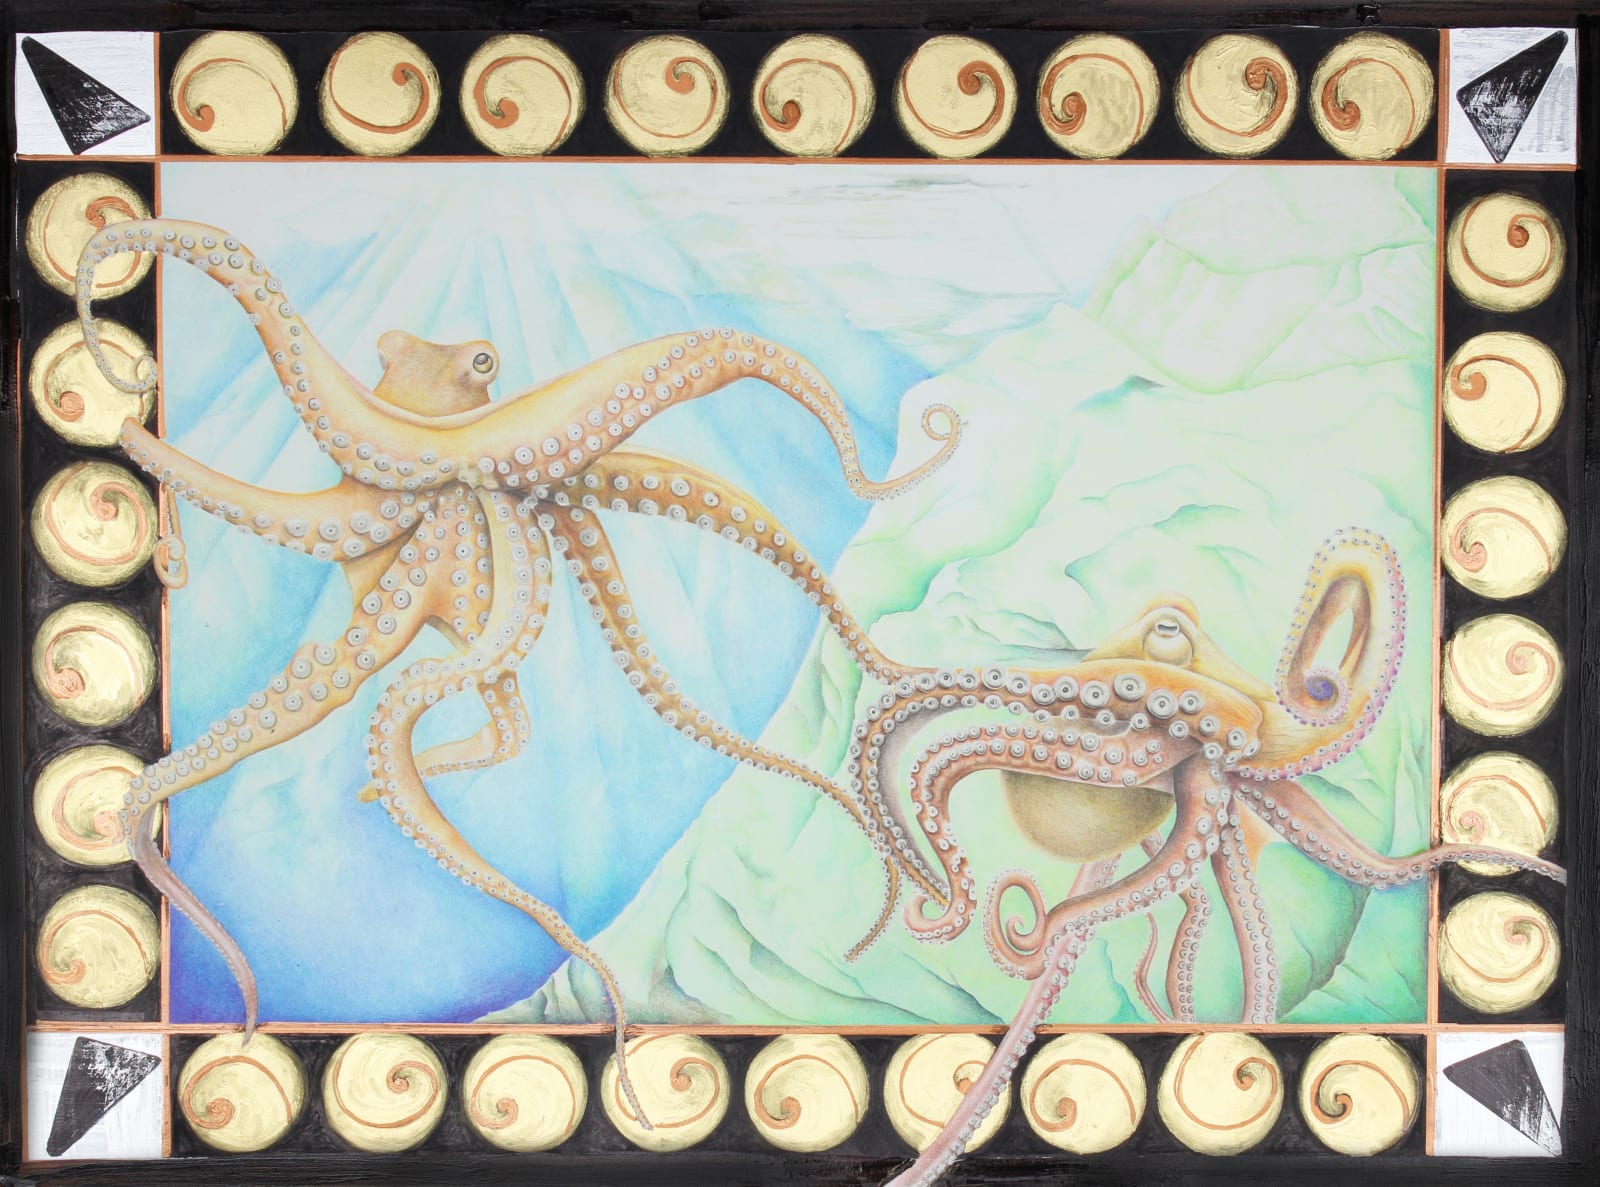 Adult Honorable Mention $50 SUSAN L. SISTRUNK (ADULT) SAVE THE CEPHALOPODS [96] Mixed media on paper